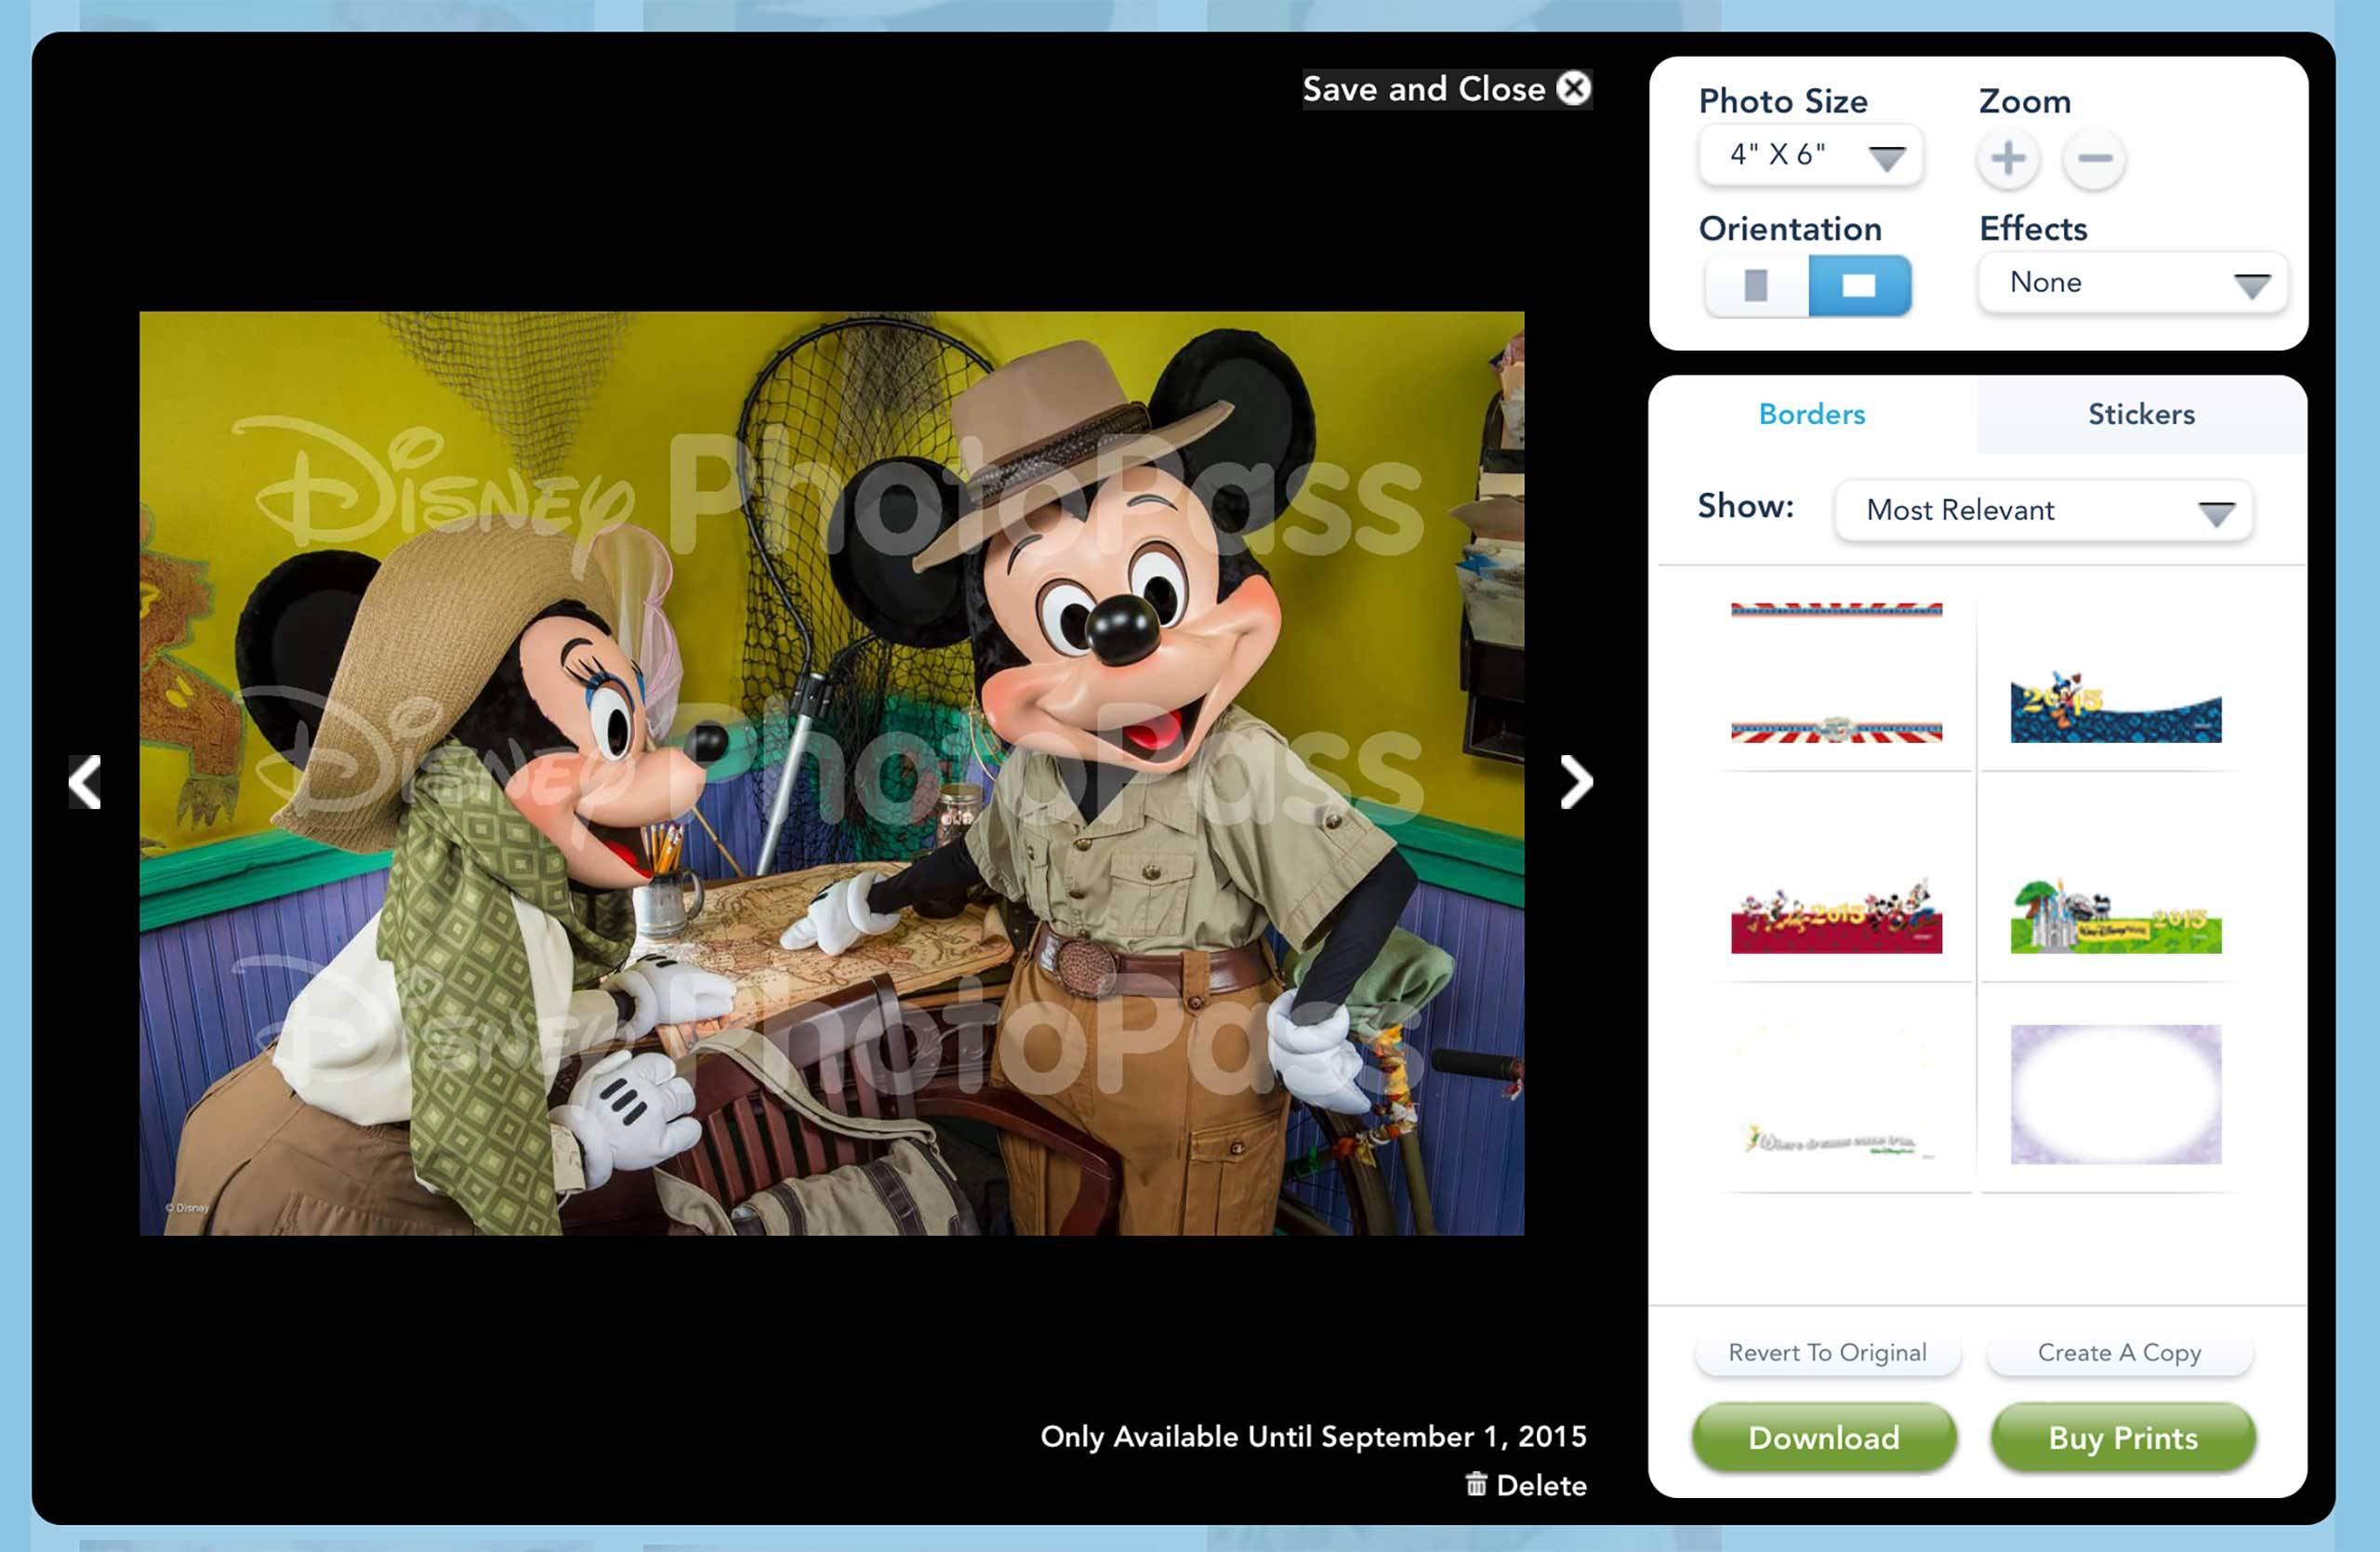 Update to Disney's PhotoPass site adds copy protection watermarks over images